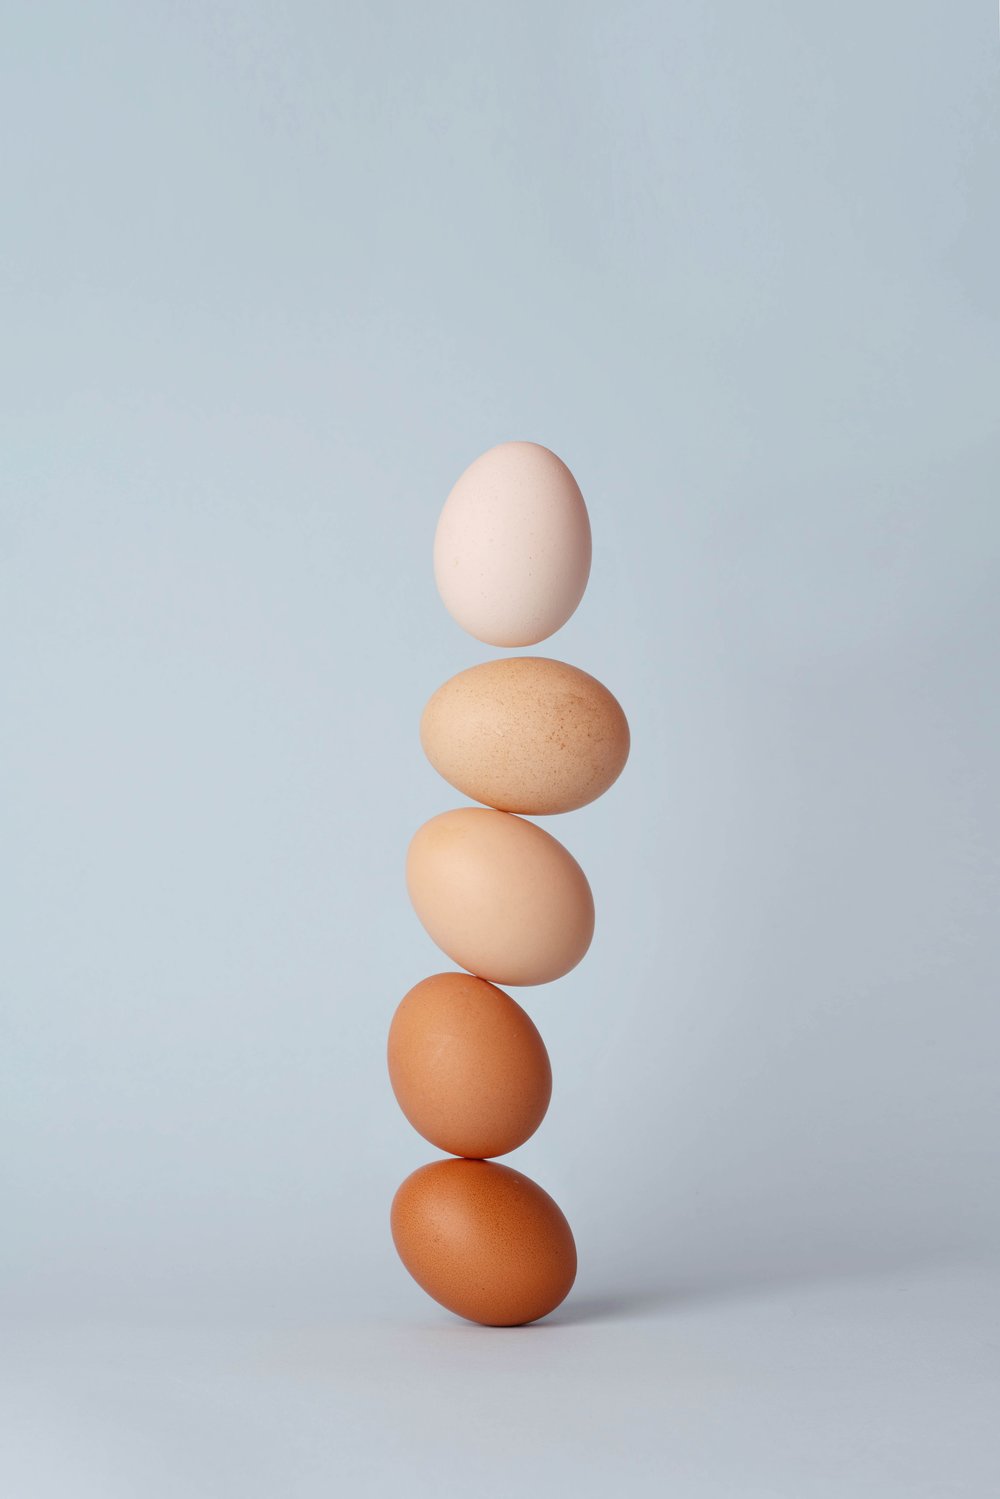 Buying eggs is a balancing act these days. Prices are skyrocketing for a number of reasons.